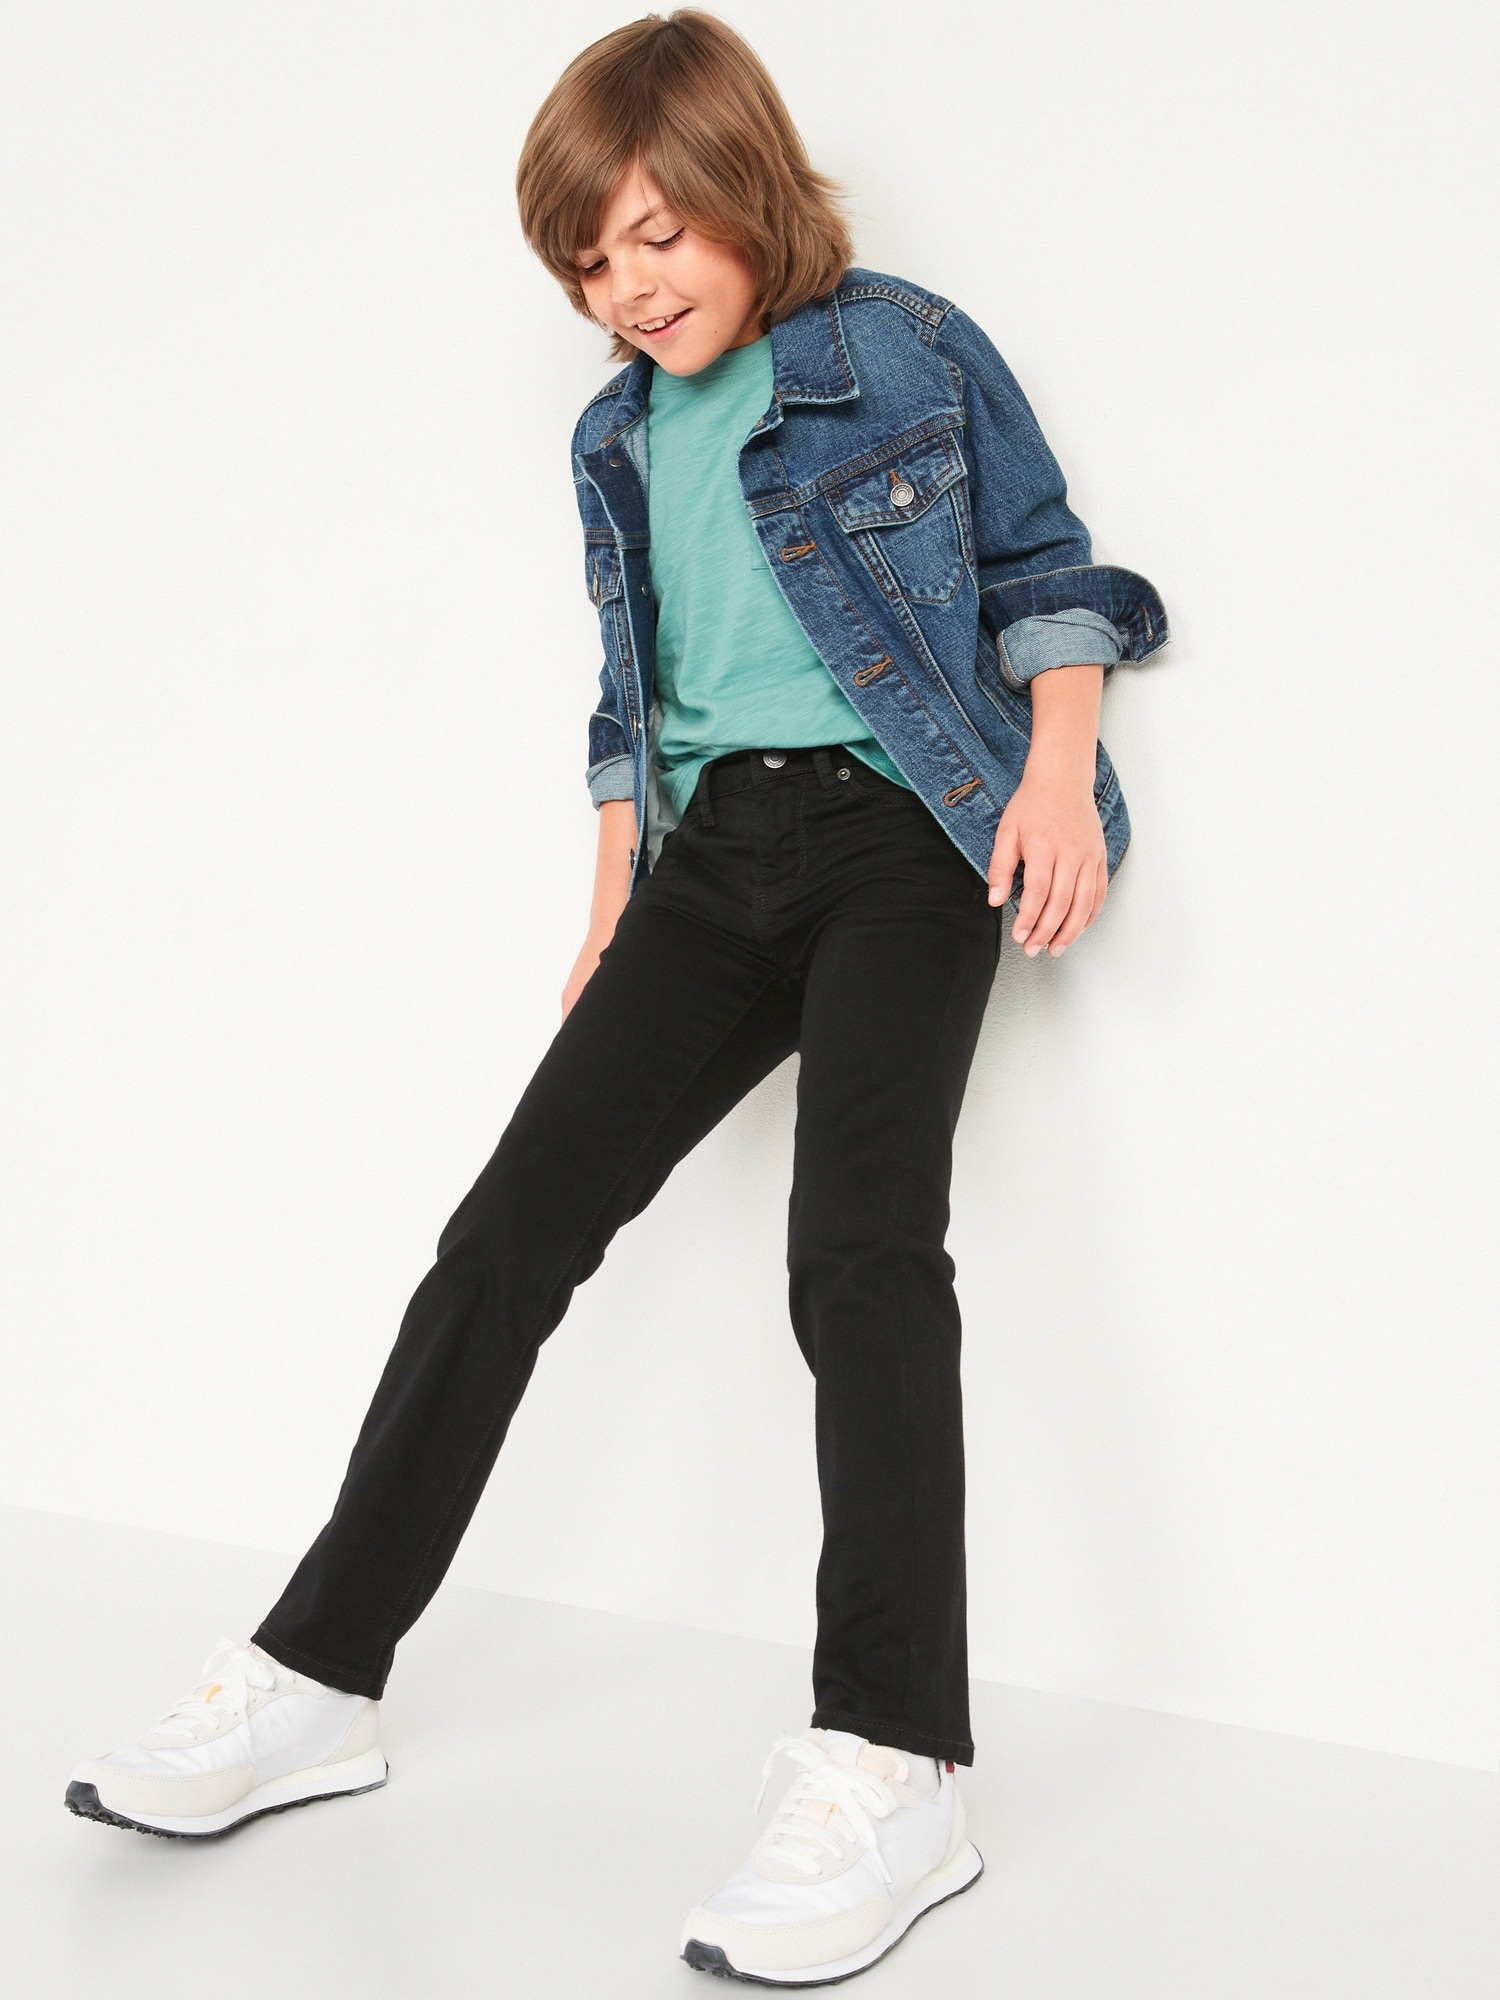 a little boy 7 years old, in a white shirt and black pants with Stock Photo  | Adobe Stock